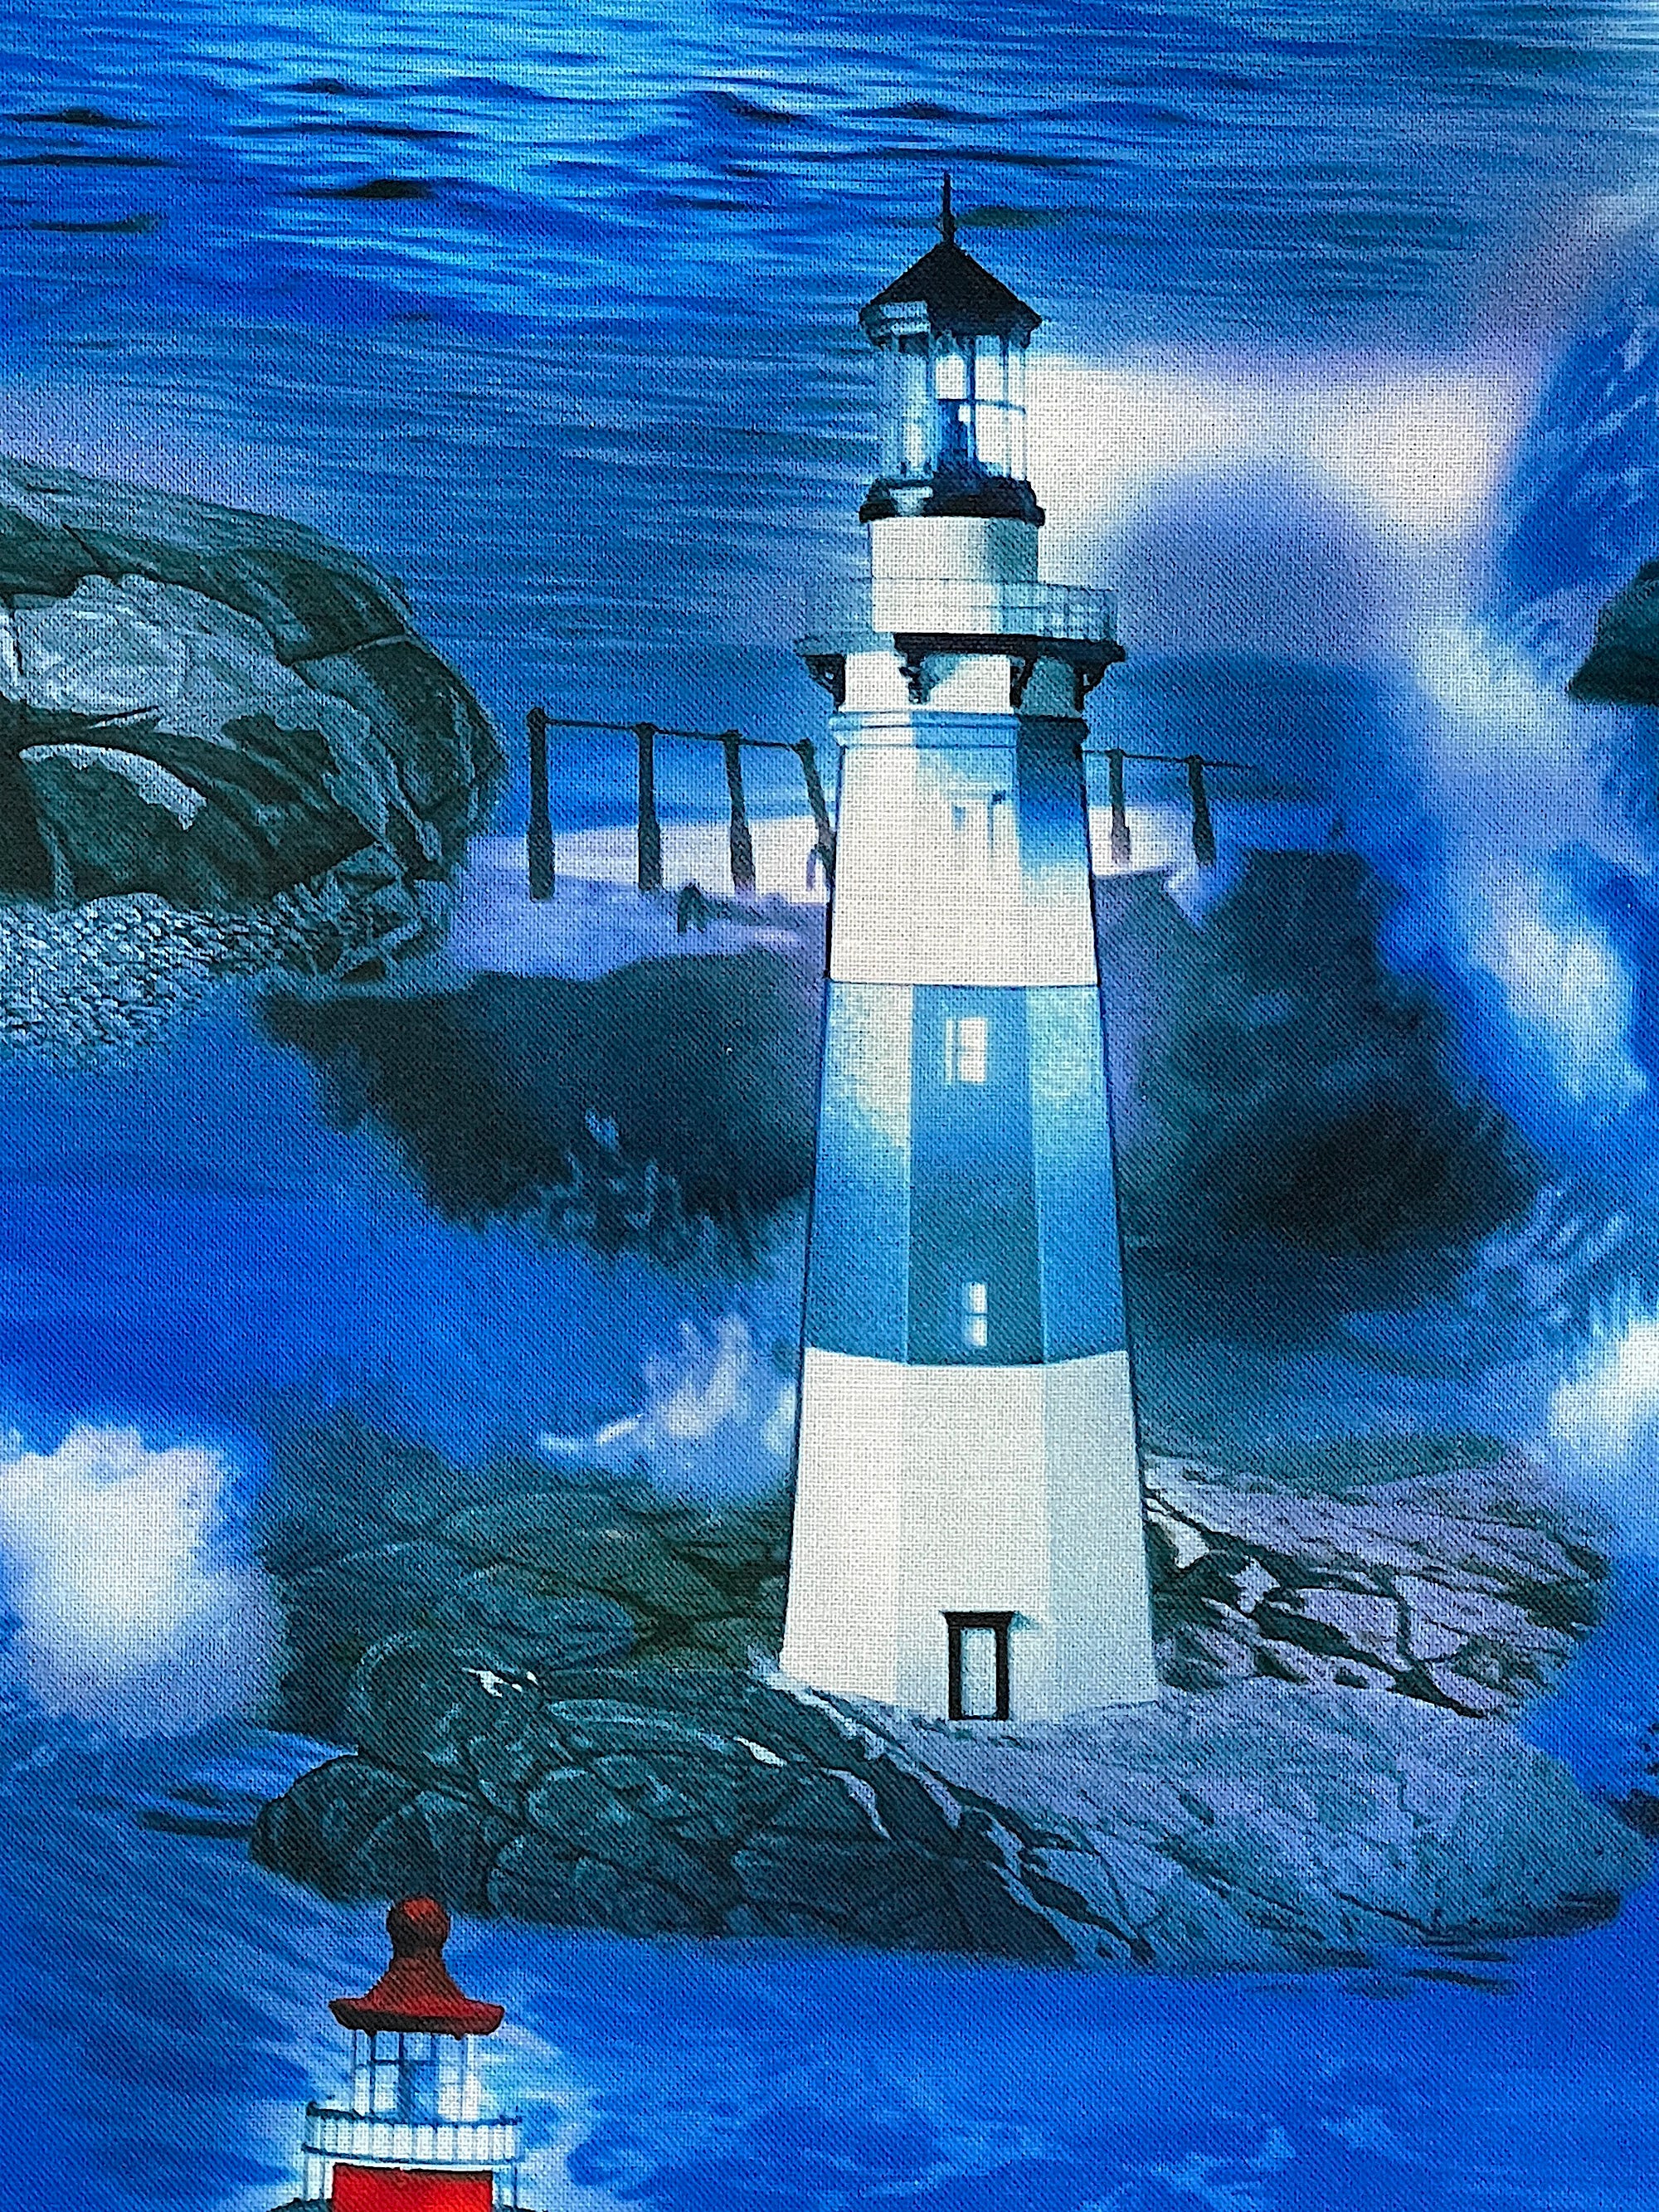 Close up a blue and white lighthouse surrounded by rock then water.